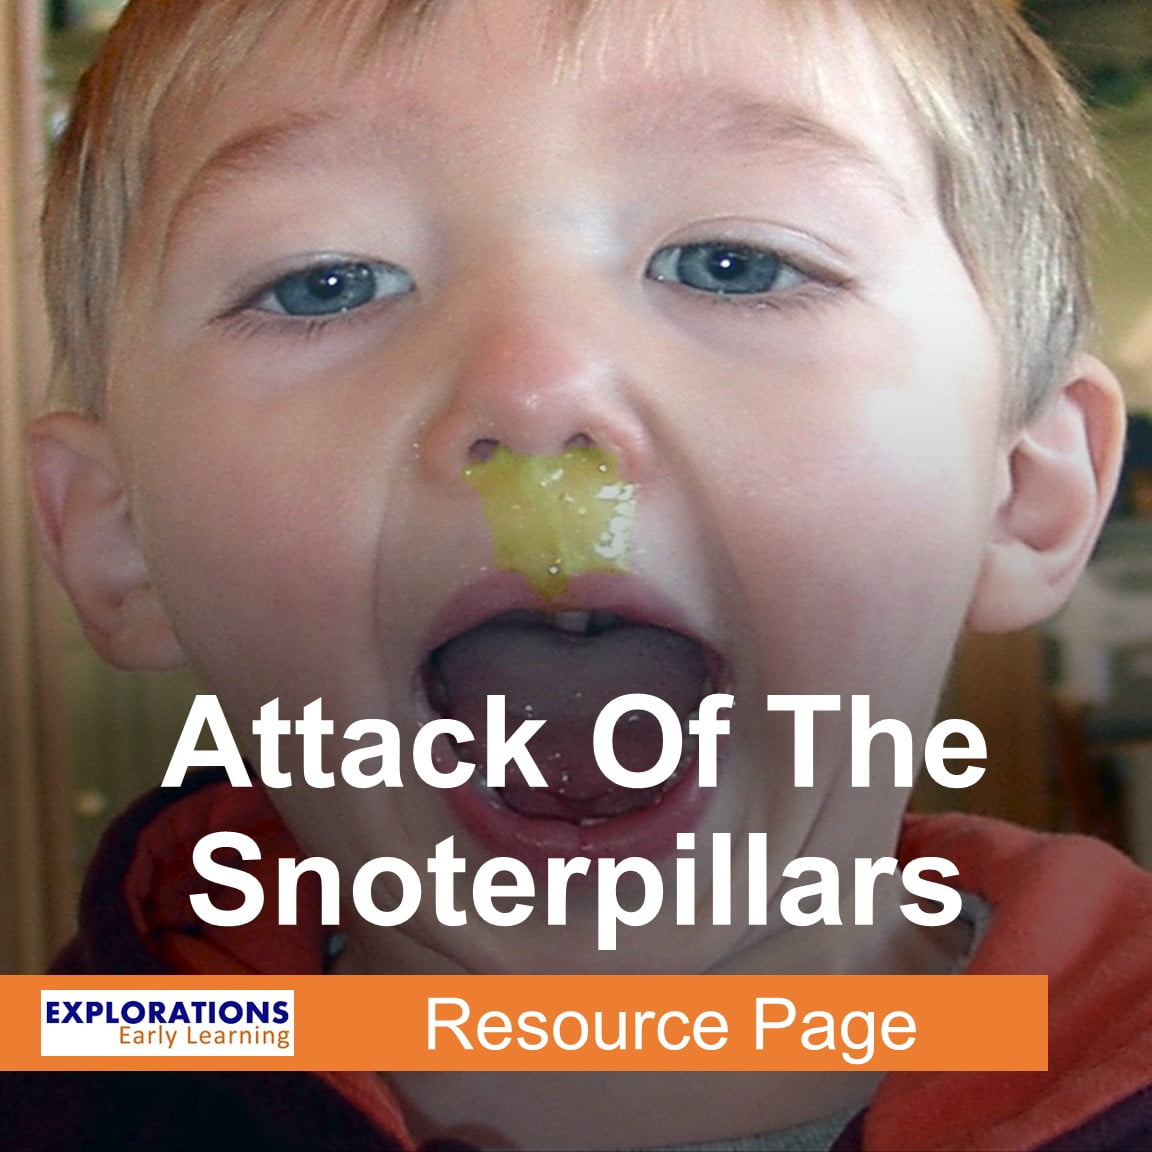 Attack Of The Snoterpillars | Resource Page